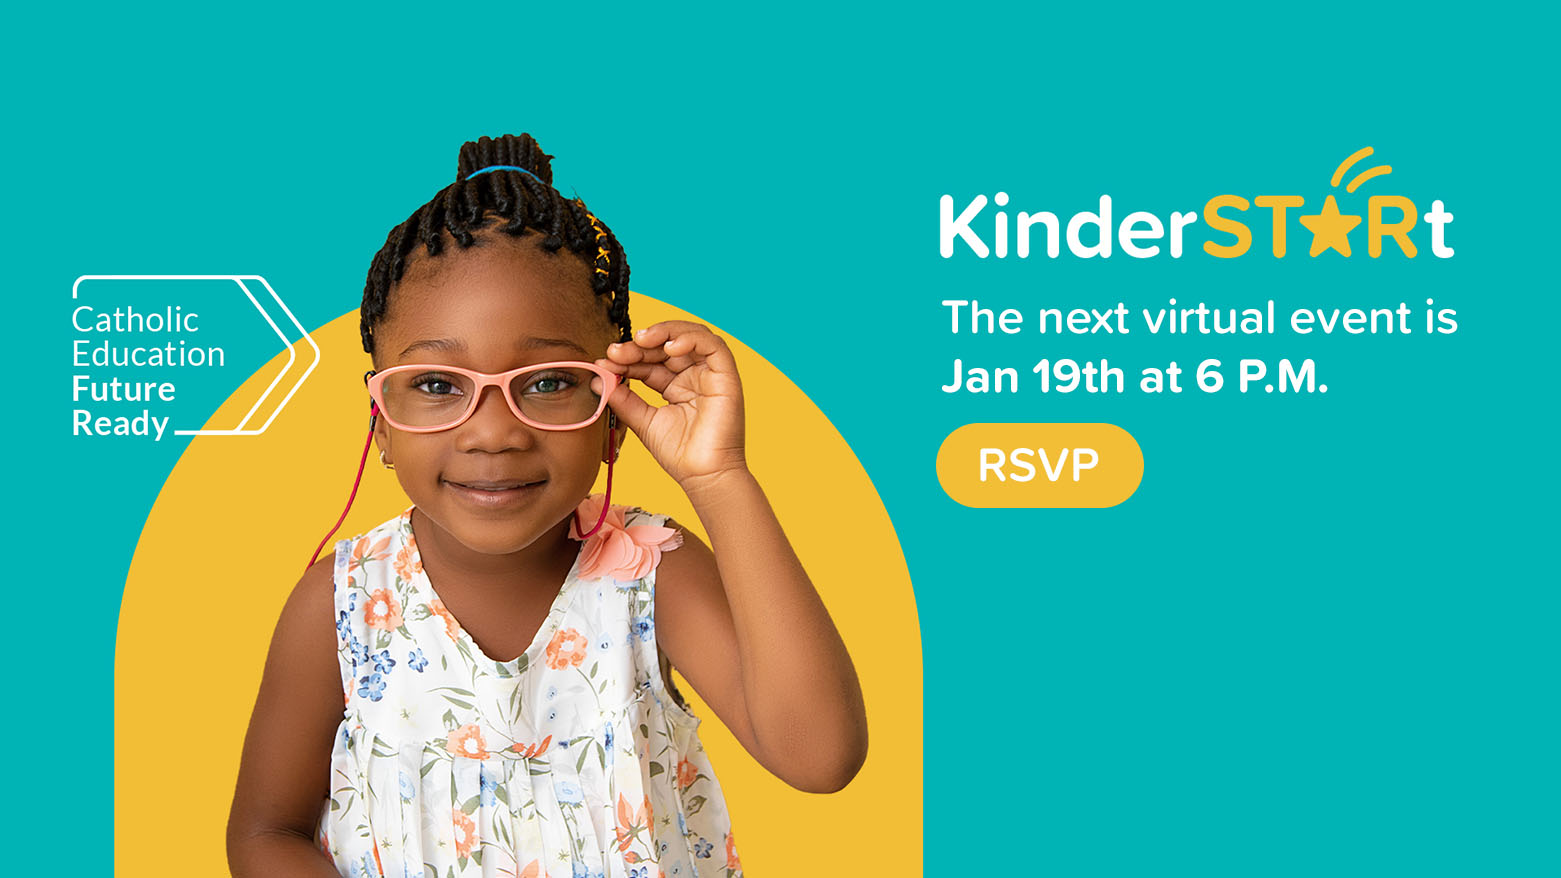 Time For Your Little Star to Shine ⭐ RSVP to KinderSTARt